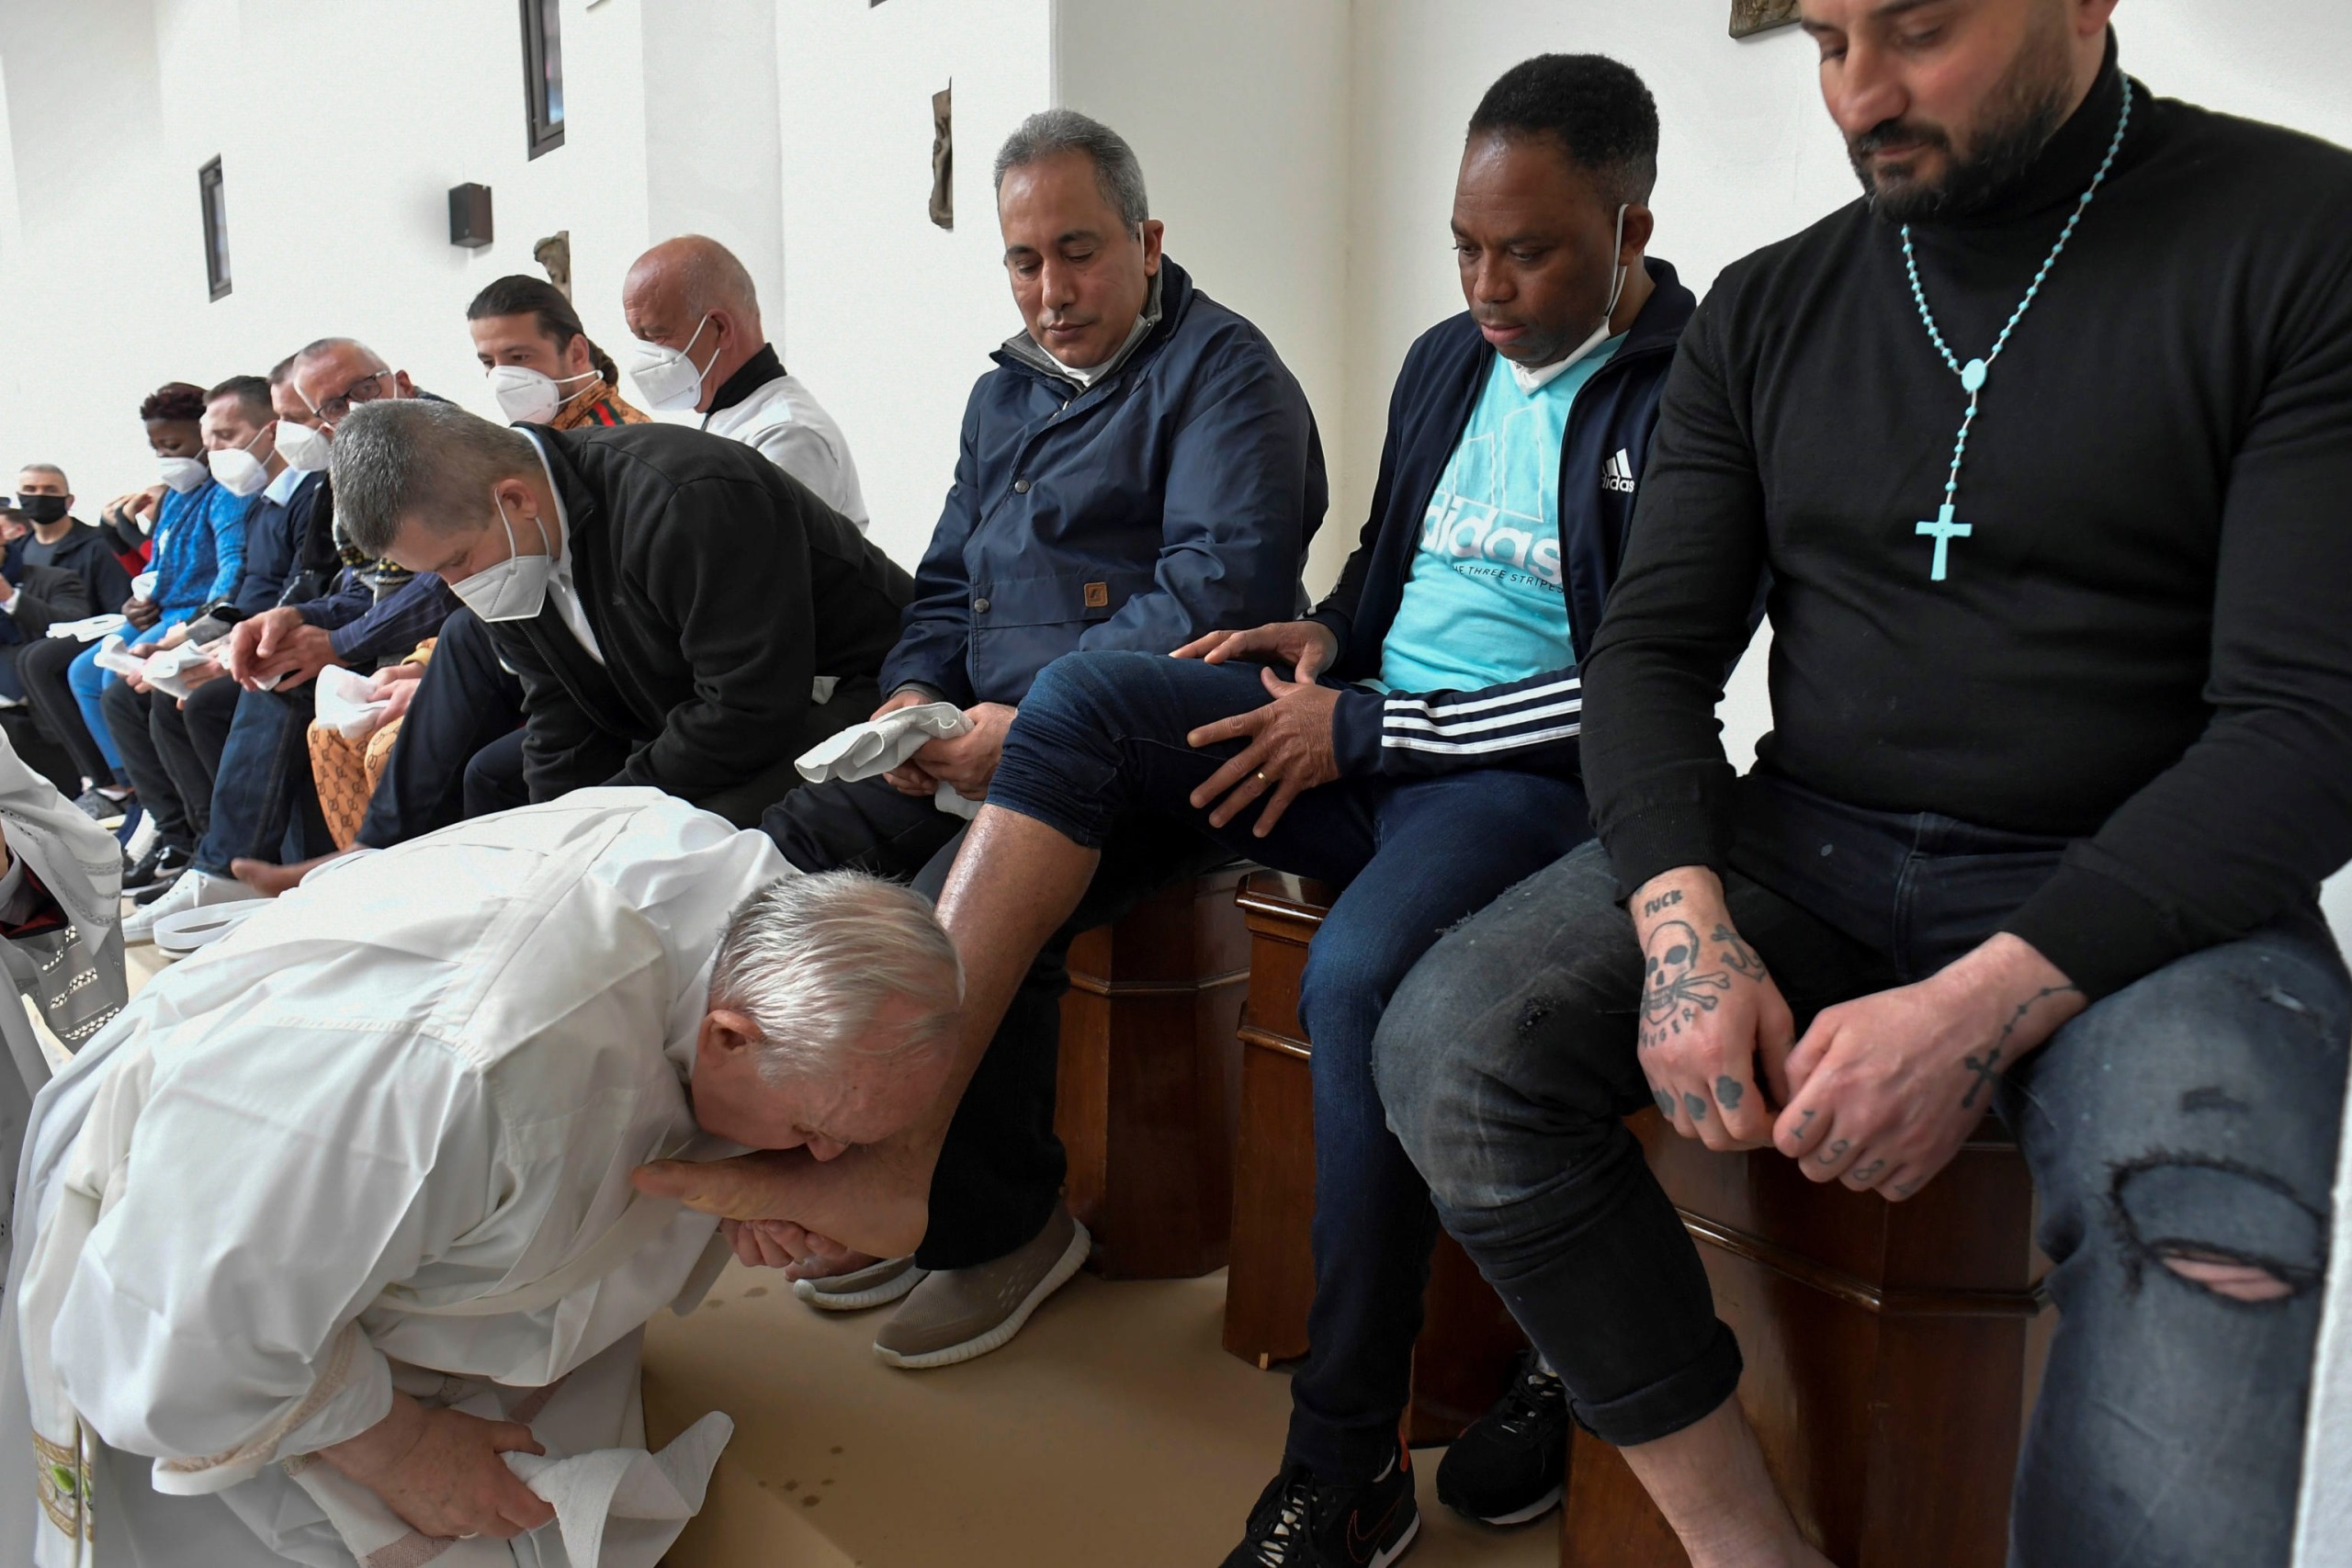 epa09890137 A handout picture provided by the Vatican Media shows Pope Francis (L) kisses an inmate's feet inside the prison of Civitavecchia, near Rome, where on Holy Thursday he makes a private visit during which he celebrates mass "'n coena Domini' with the traditional rite of 'washing of the feet' of 12 inmates, in Civitavecchia, Italy, 14 April 2022.  EPA/VATICAN MEDIA HANDOUT  HANDOUT EDITORIAL USE ONLY/NO SALES